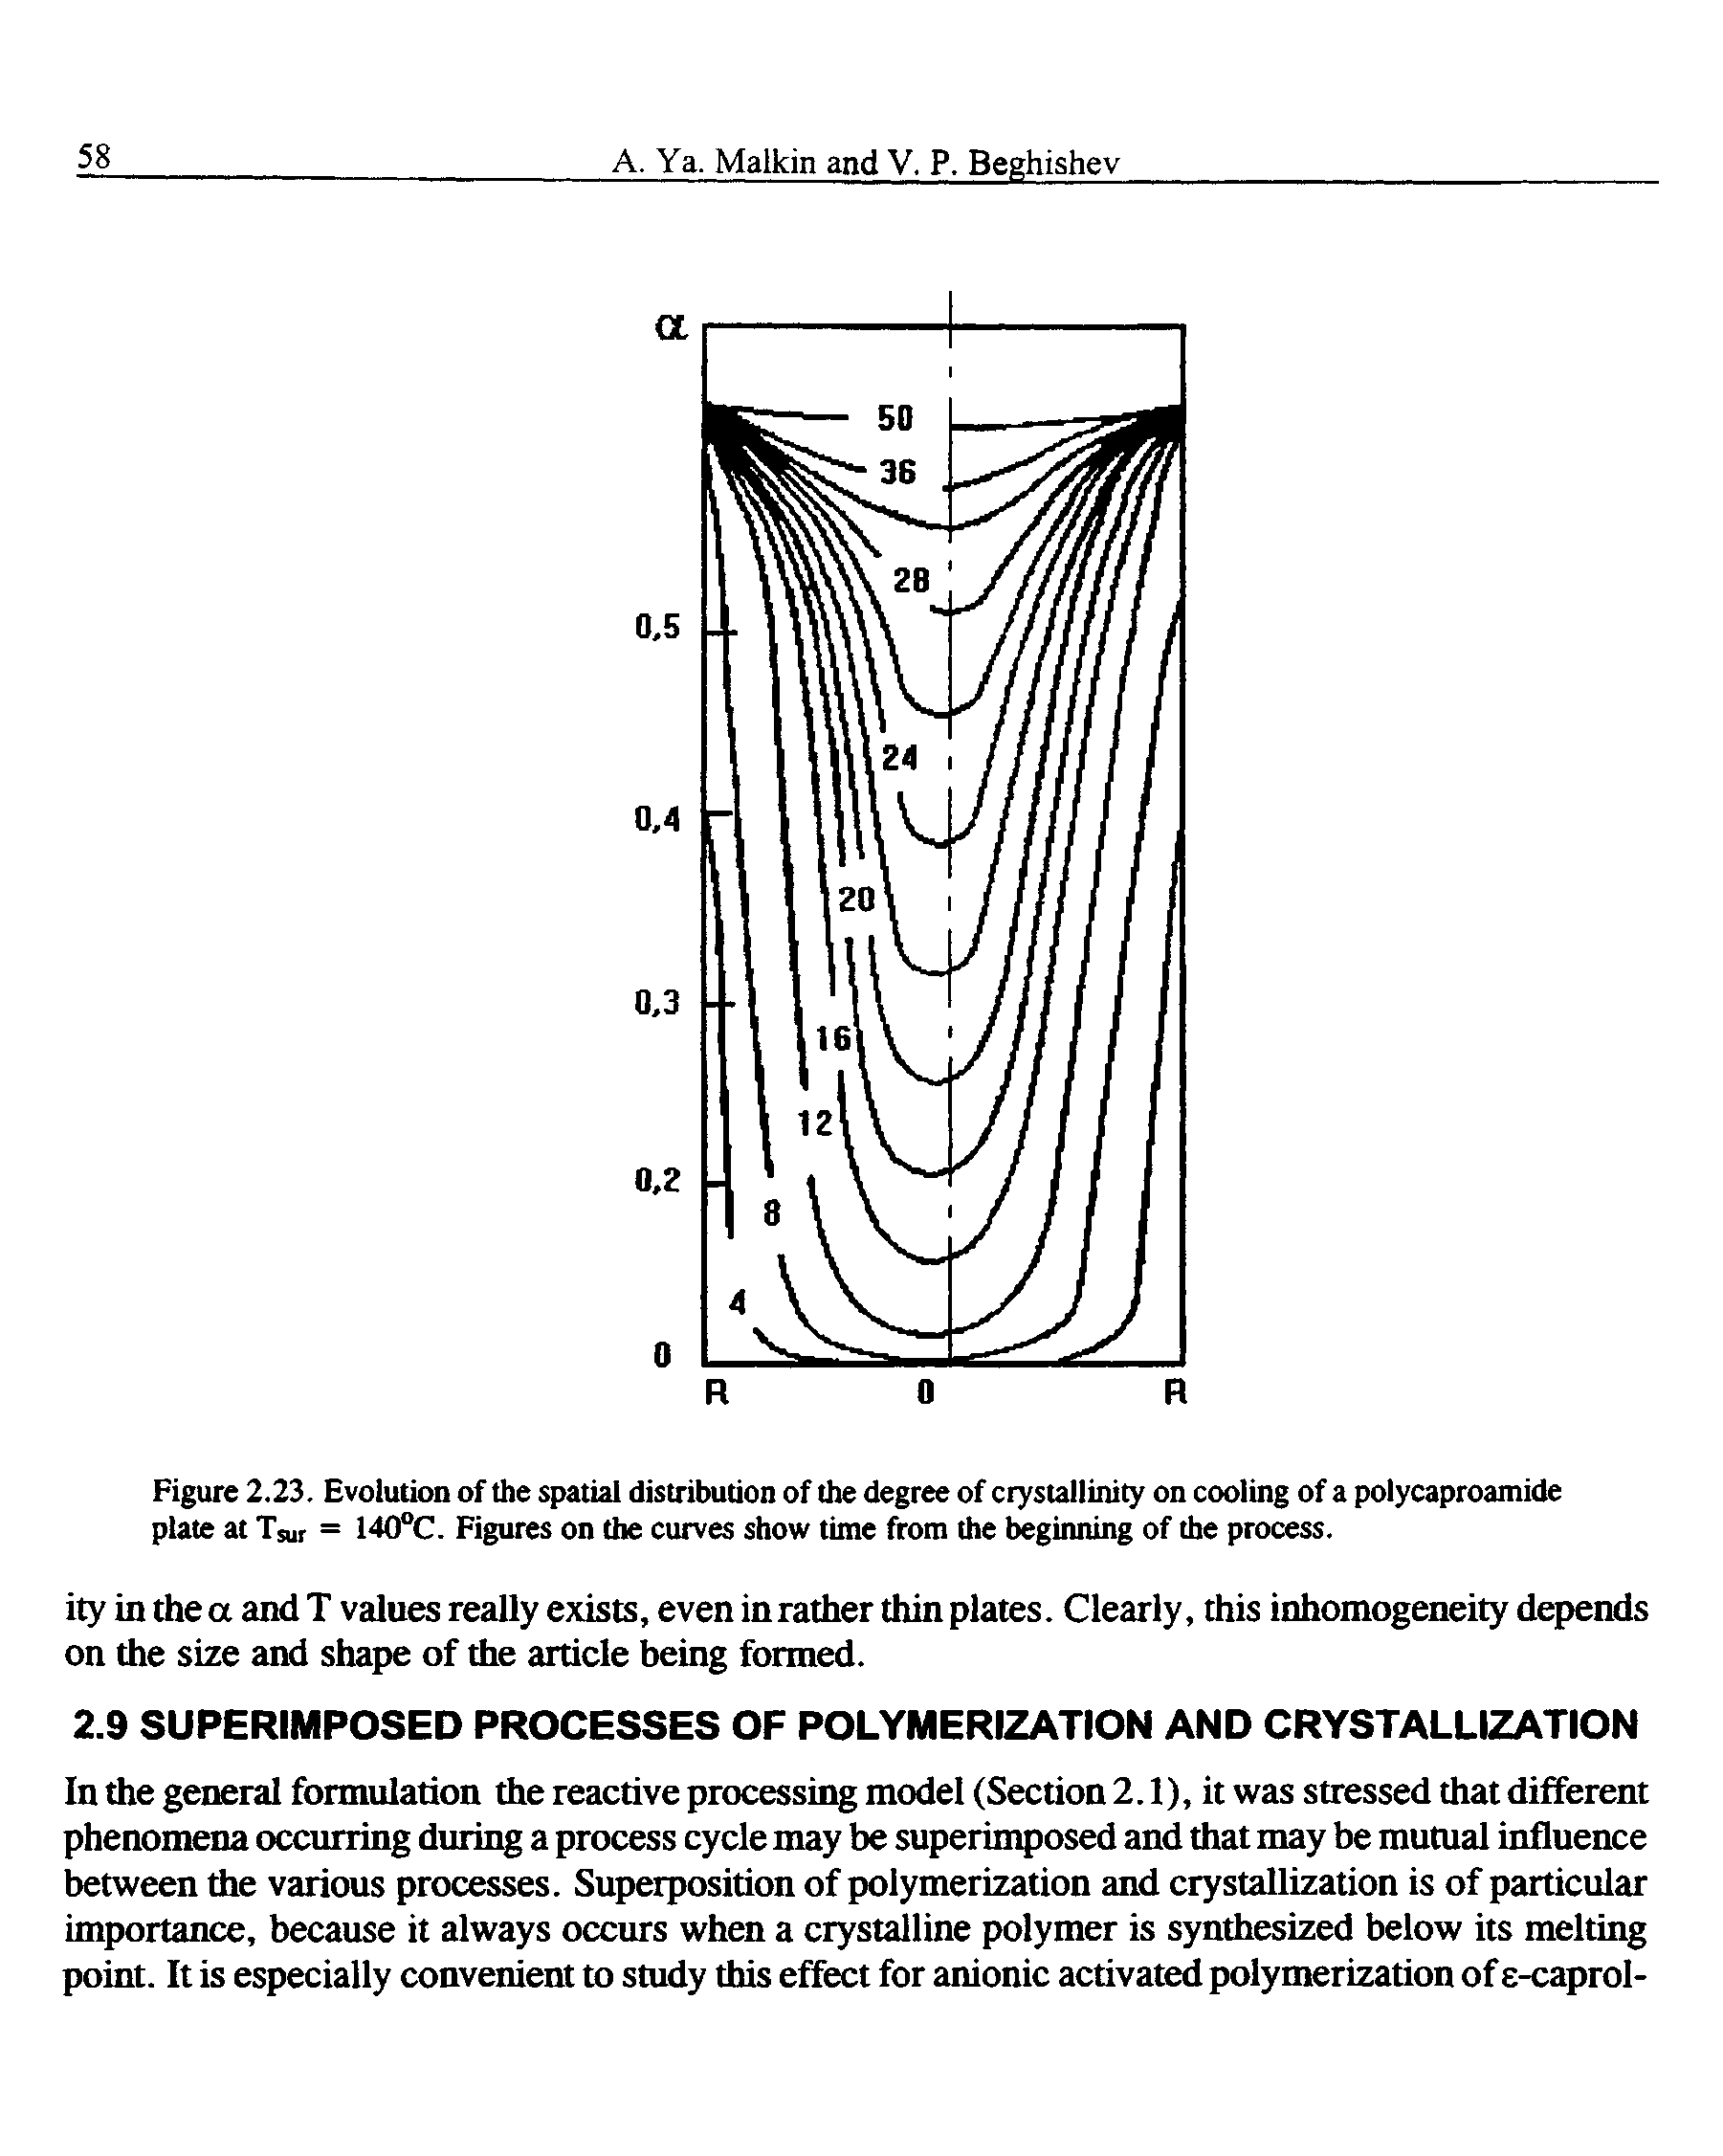 Figure 2.23. Evolution of the spatial distribution of the degree of crystallinity on cooling of a polycaproamide plate at Tsur = 140°C. Figures on the curves show time from the beginning of the process.